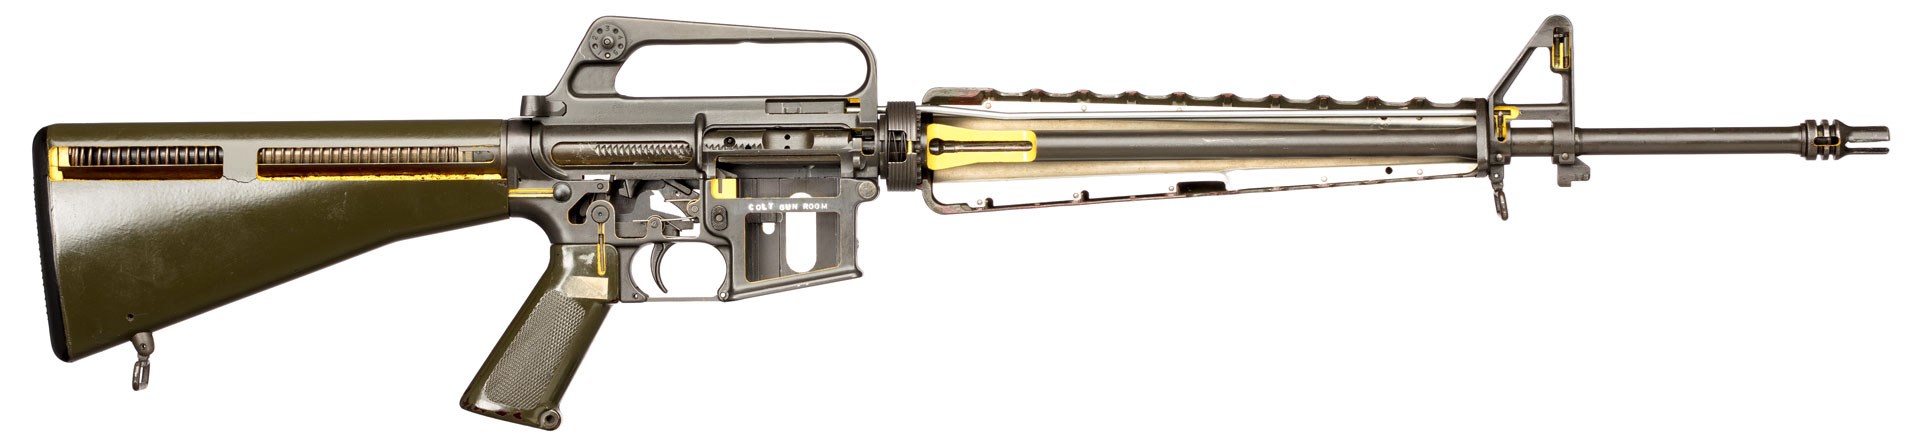 Right side view of a COLT/ArmaLite AR-15 Model 601 cutaway that reveals details of the rifle’s gas tube, the left handguard’s single heat shield, and the early Edgewater buffer. Photo courtesy of the Institute for Military Technology